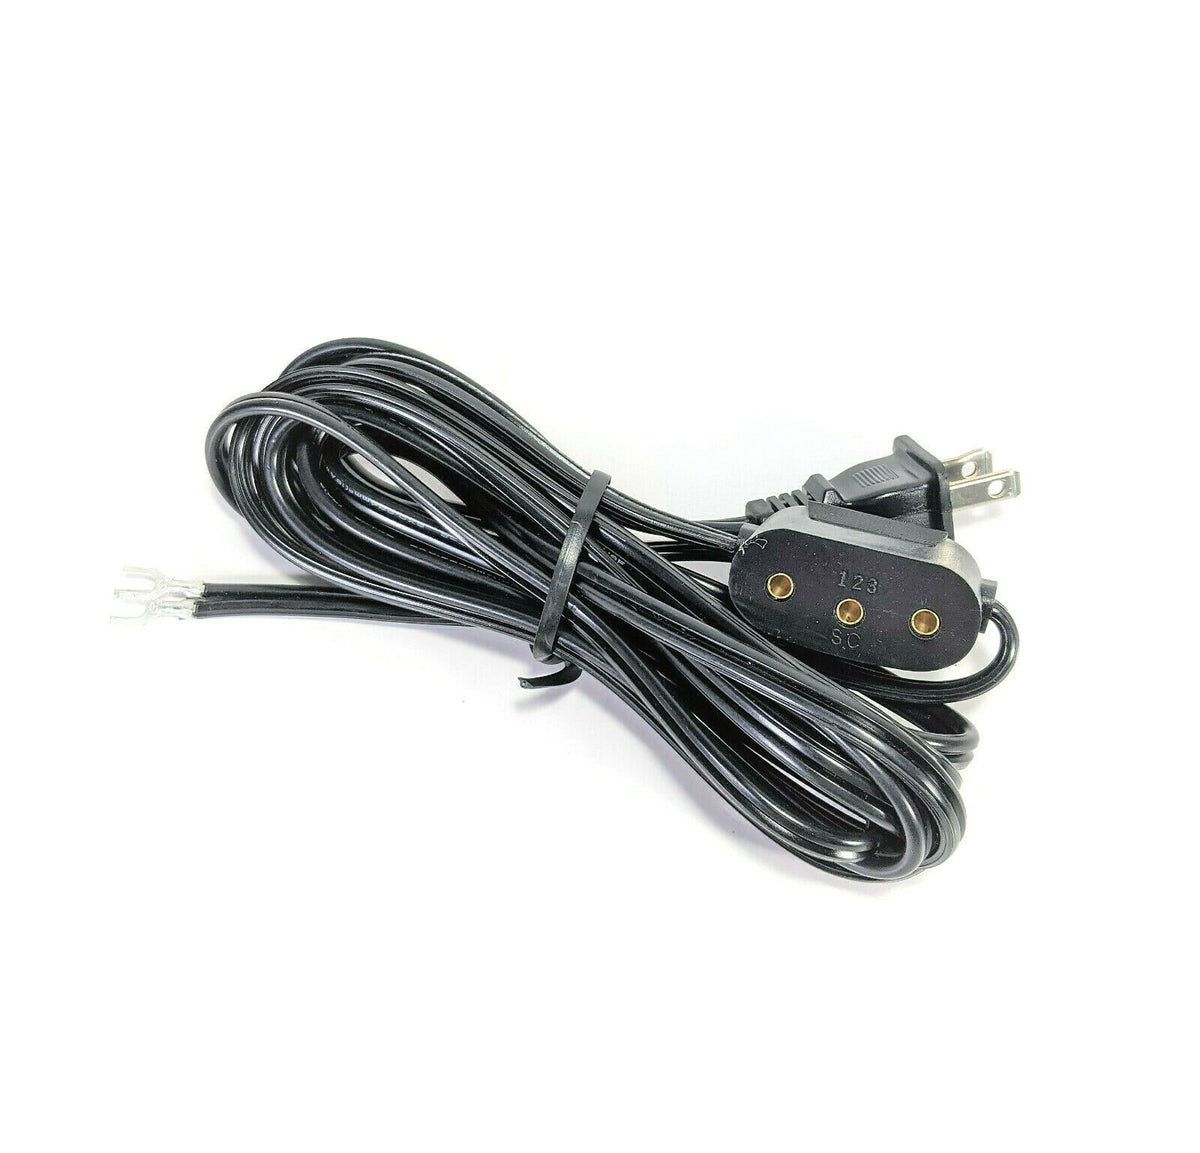 Power Cord 122 for Many Singerr Sewing Machines